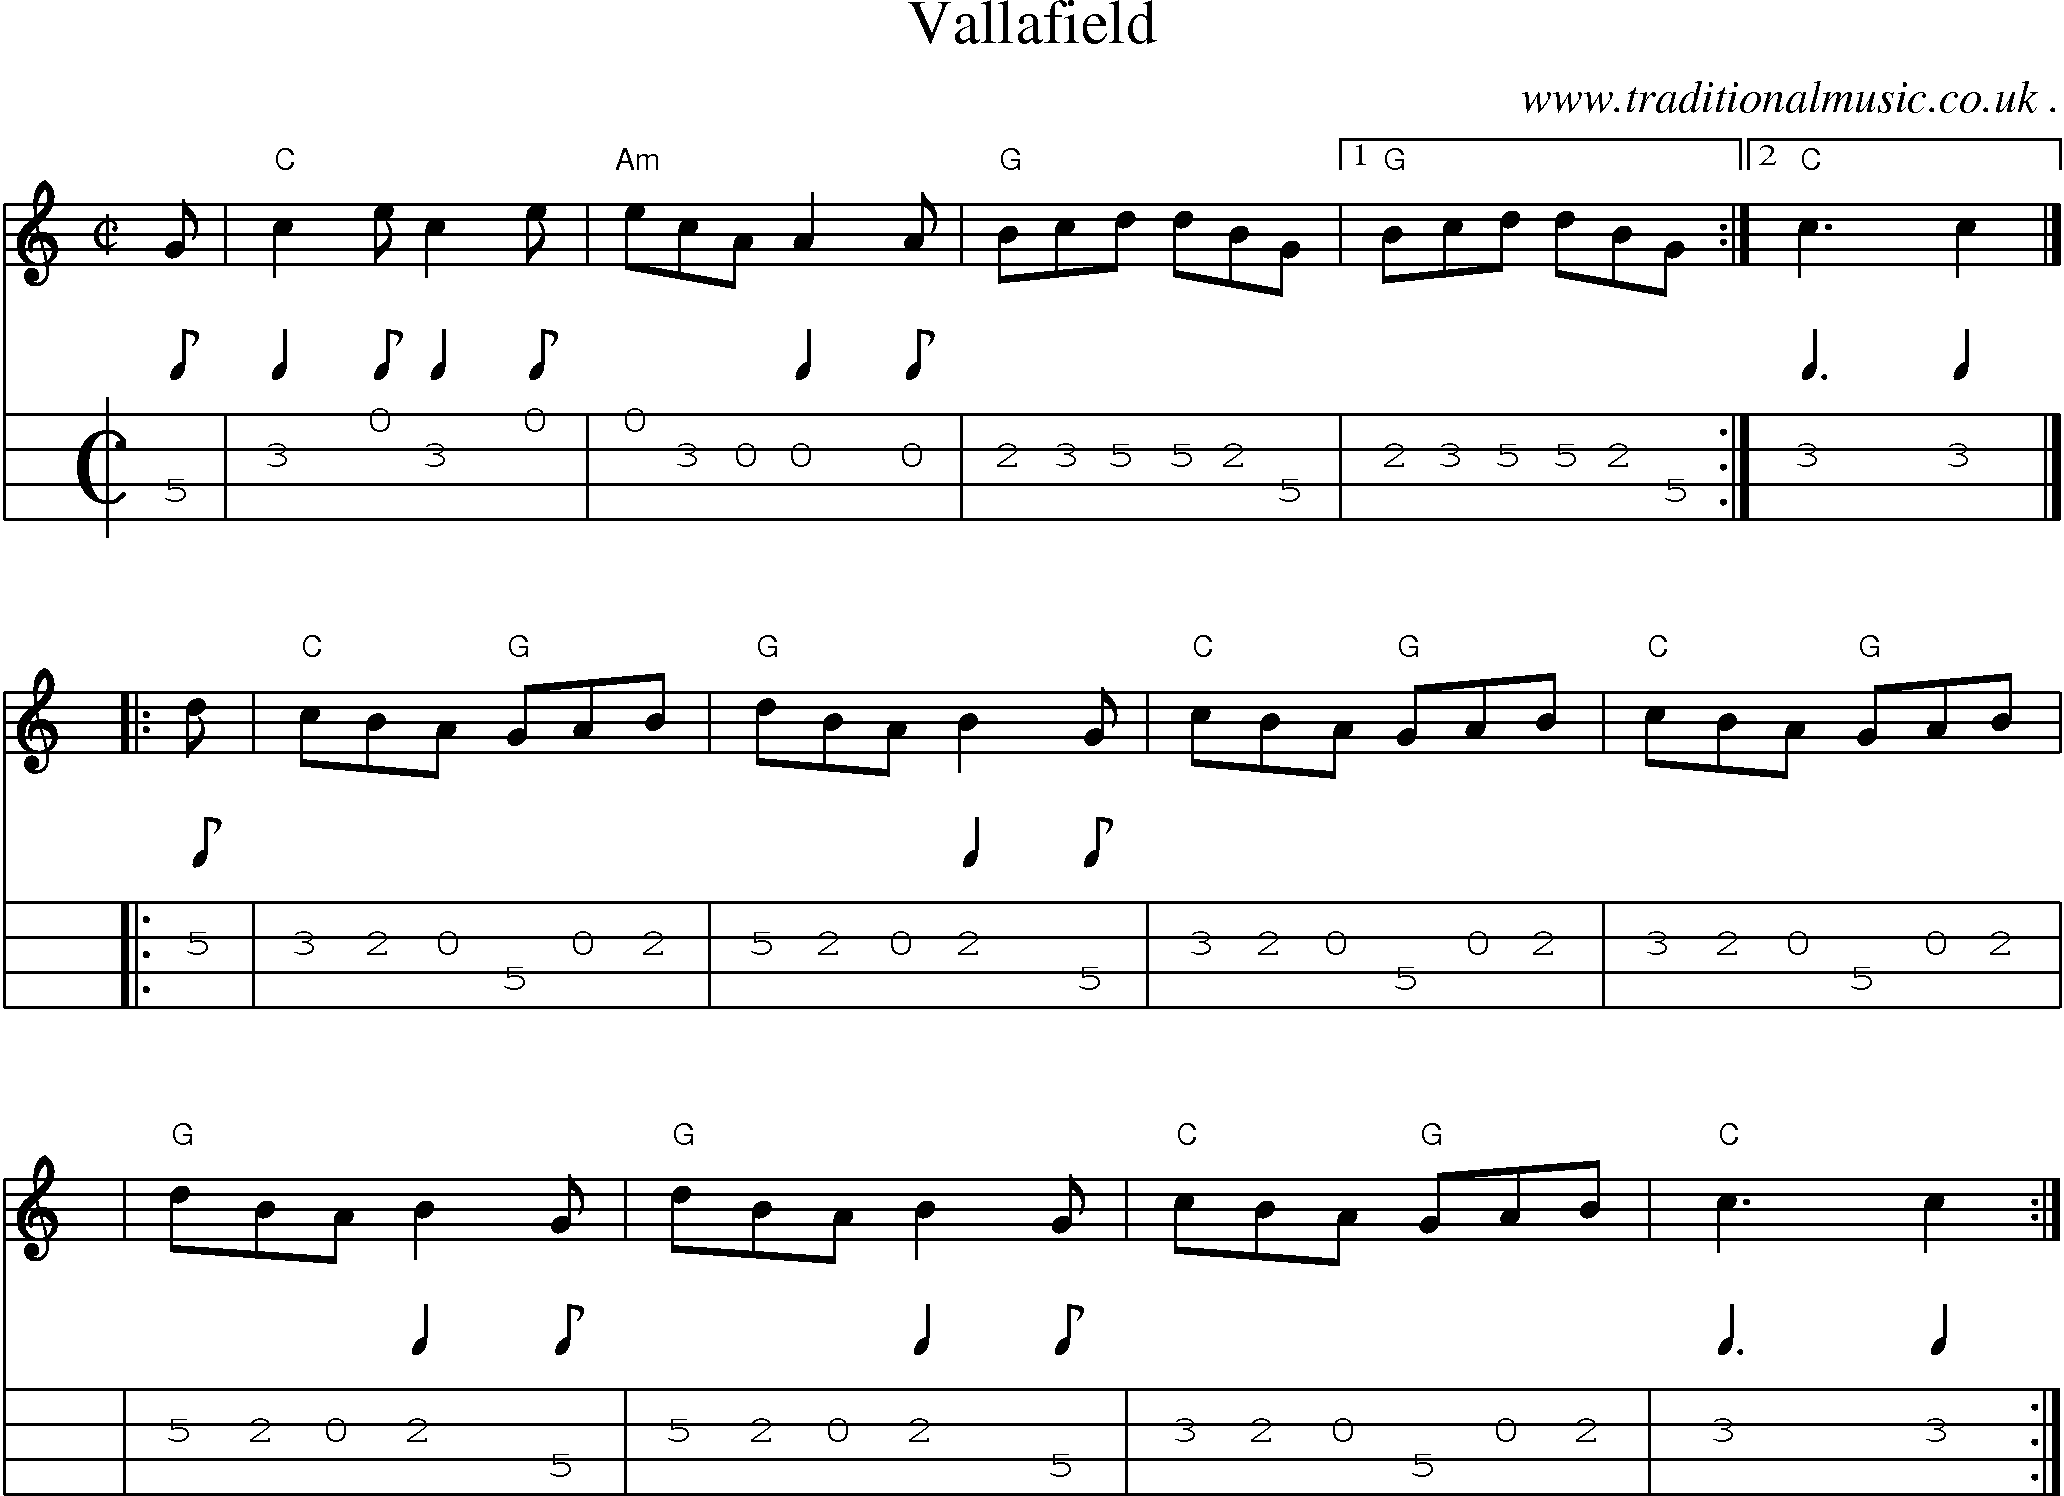 Sheet-music  score, Chords and Mandolin Tabs for Vallafield